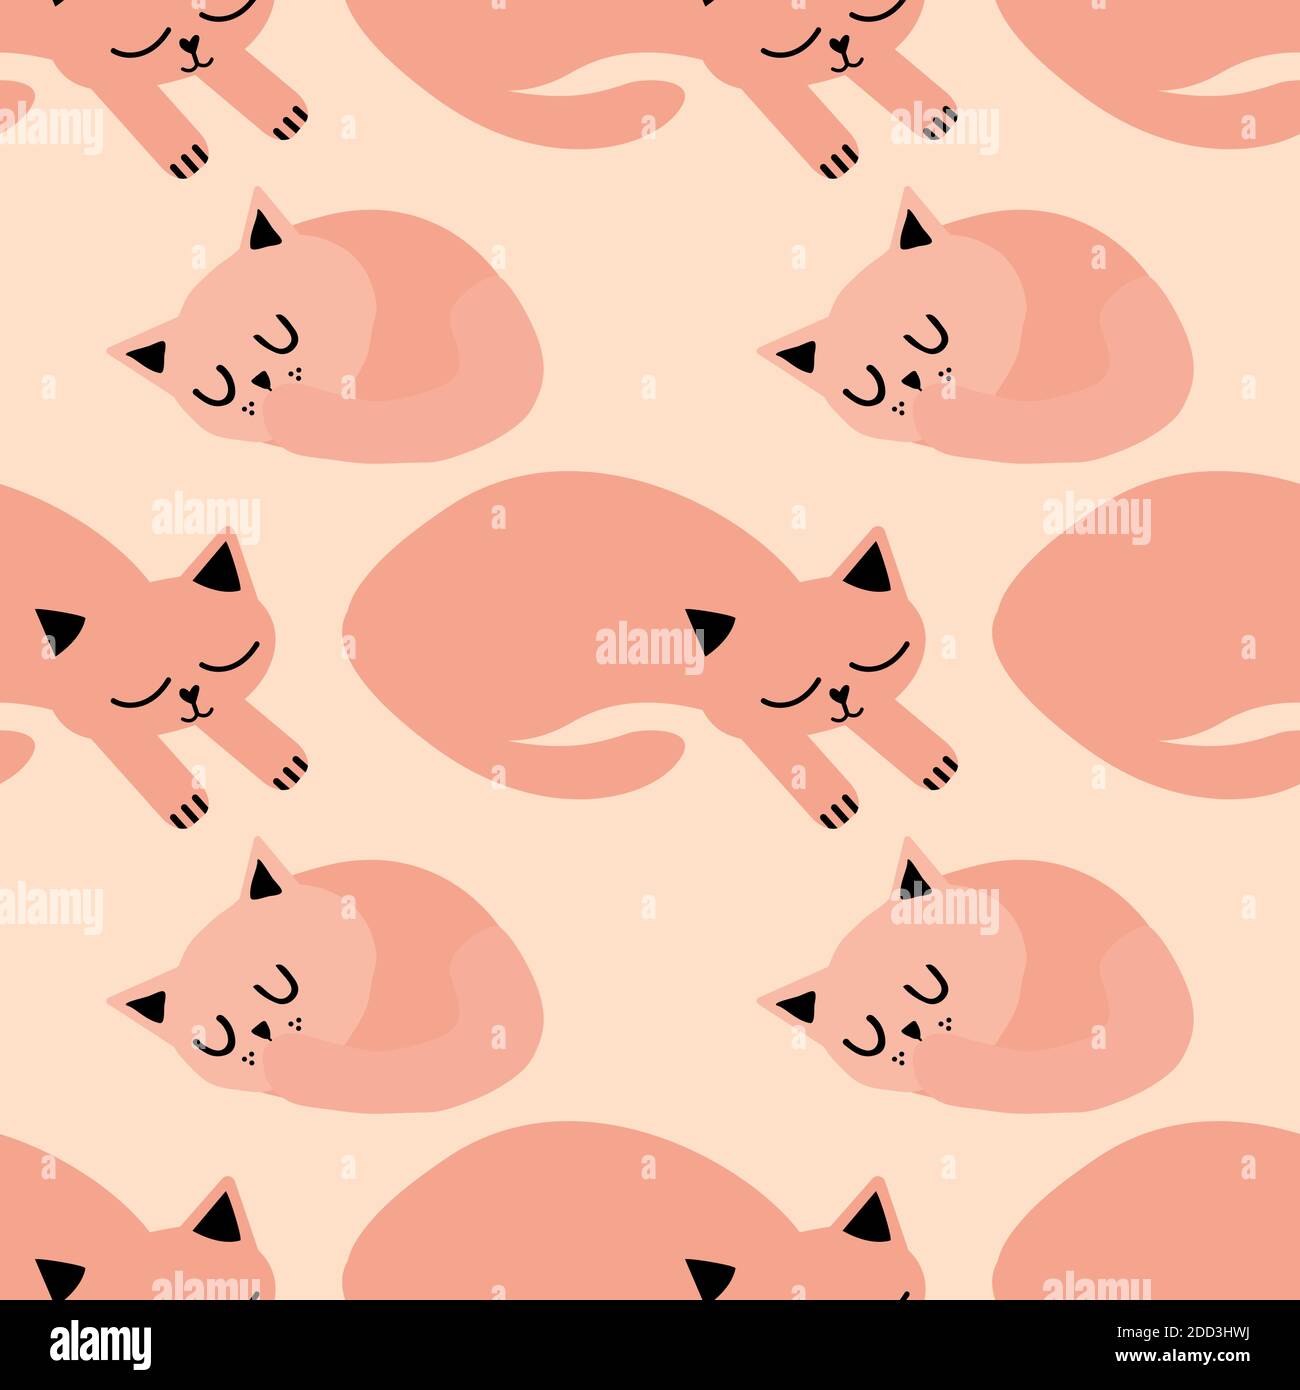 Cute sleeping kawaii cats vector seamless pattern background. Salmon pink backdrop with curled up and stretched out sleepy cartoon kitties. Hand drawn Stock Vector